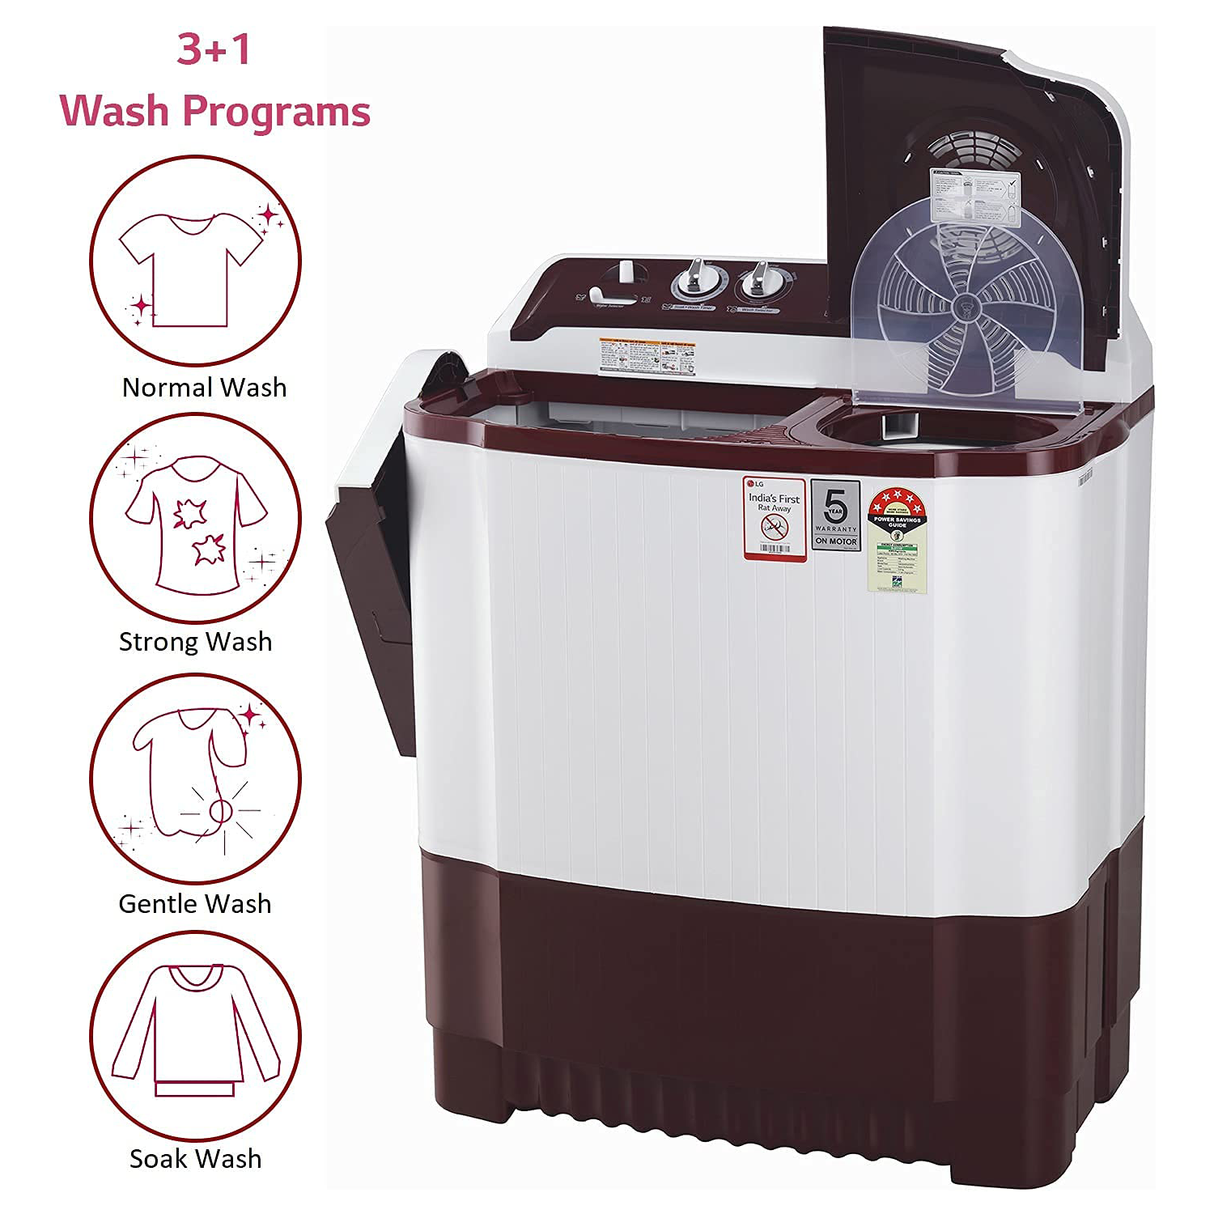 Experience convenience with the LG 8kg White Semi Automatic Top Load Washing Machine.